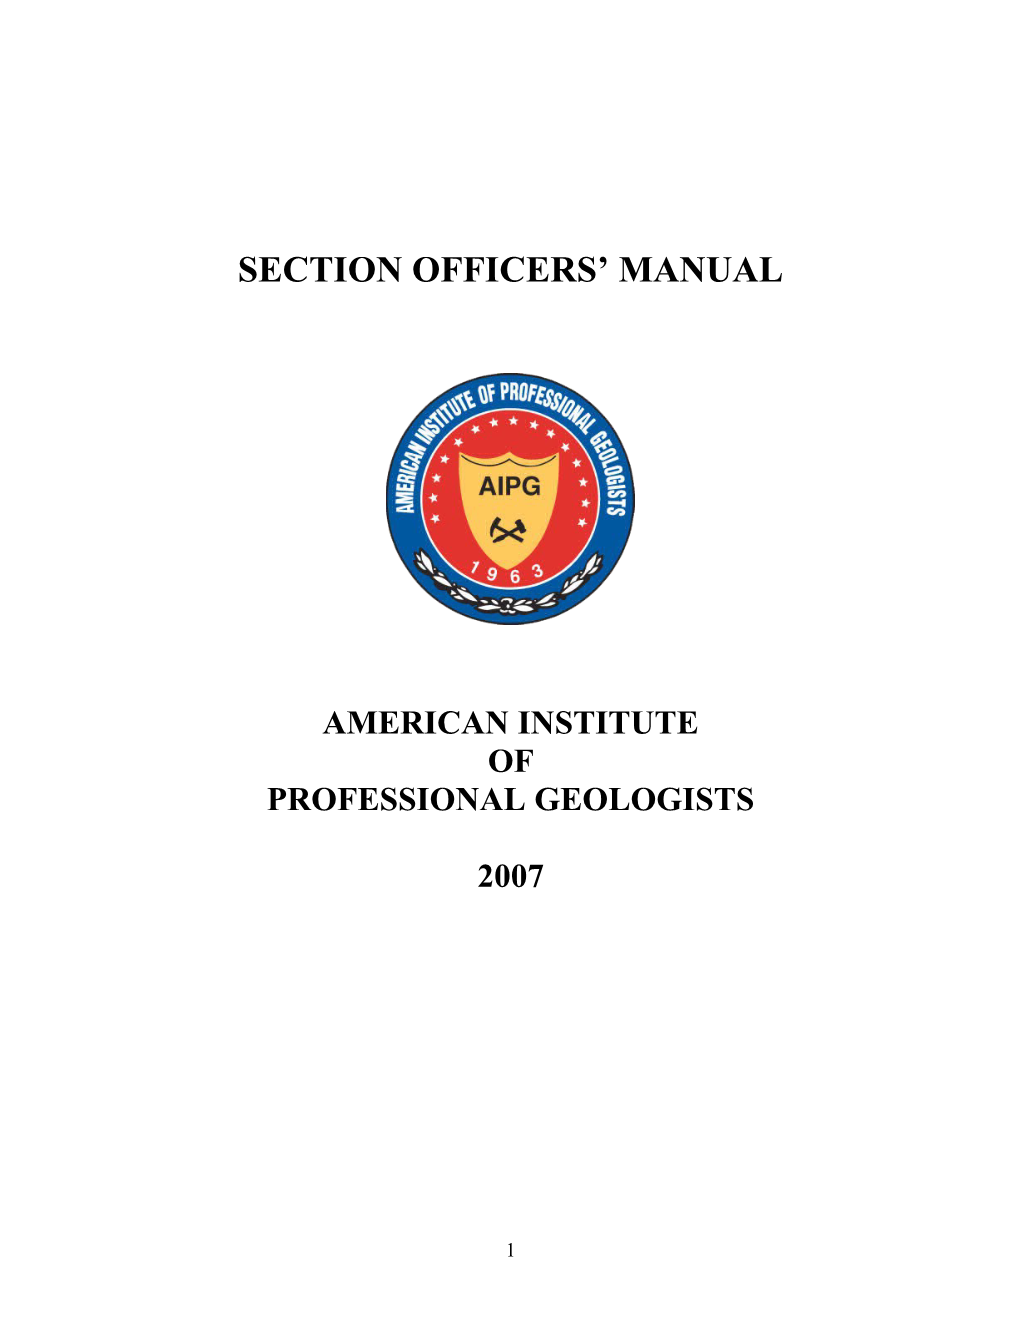 AIPG SECTION OFFICERS MANUAL V2007